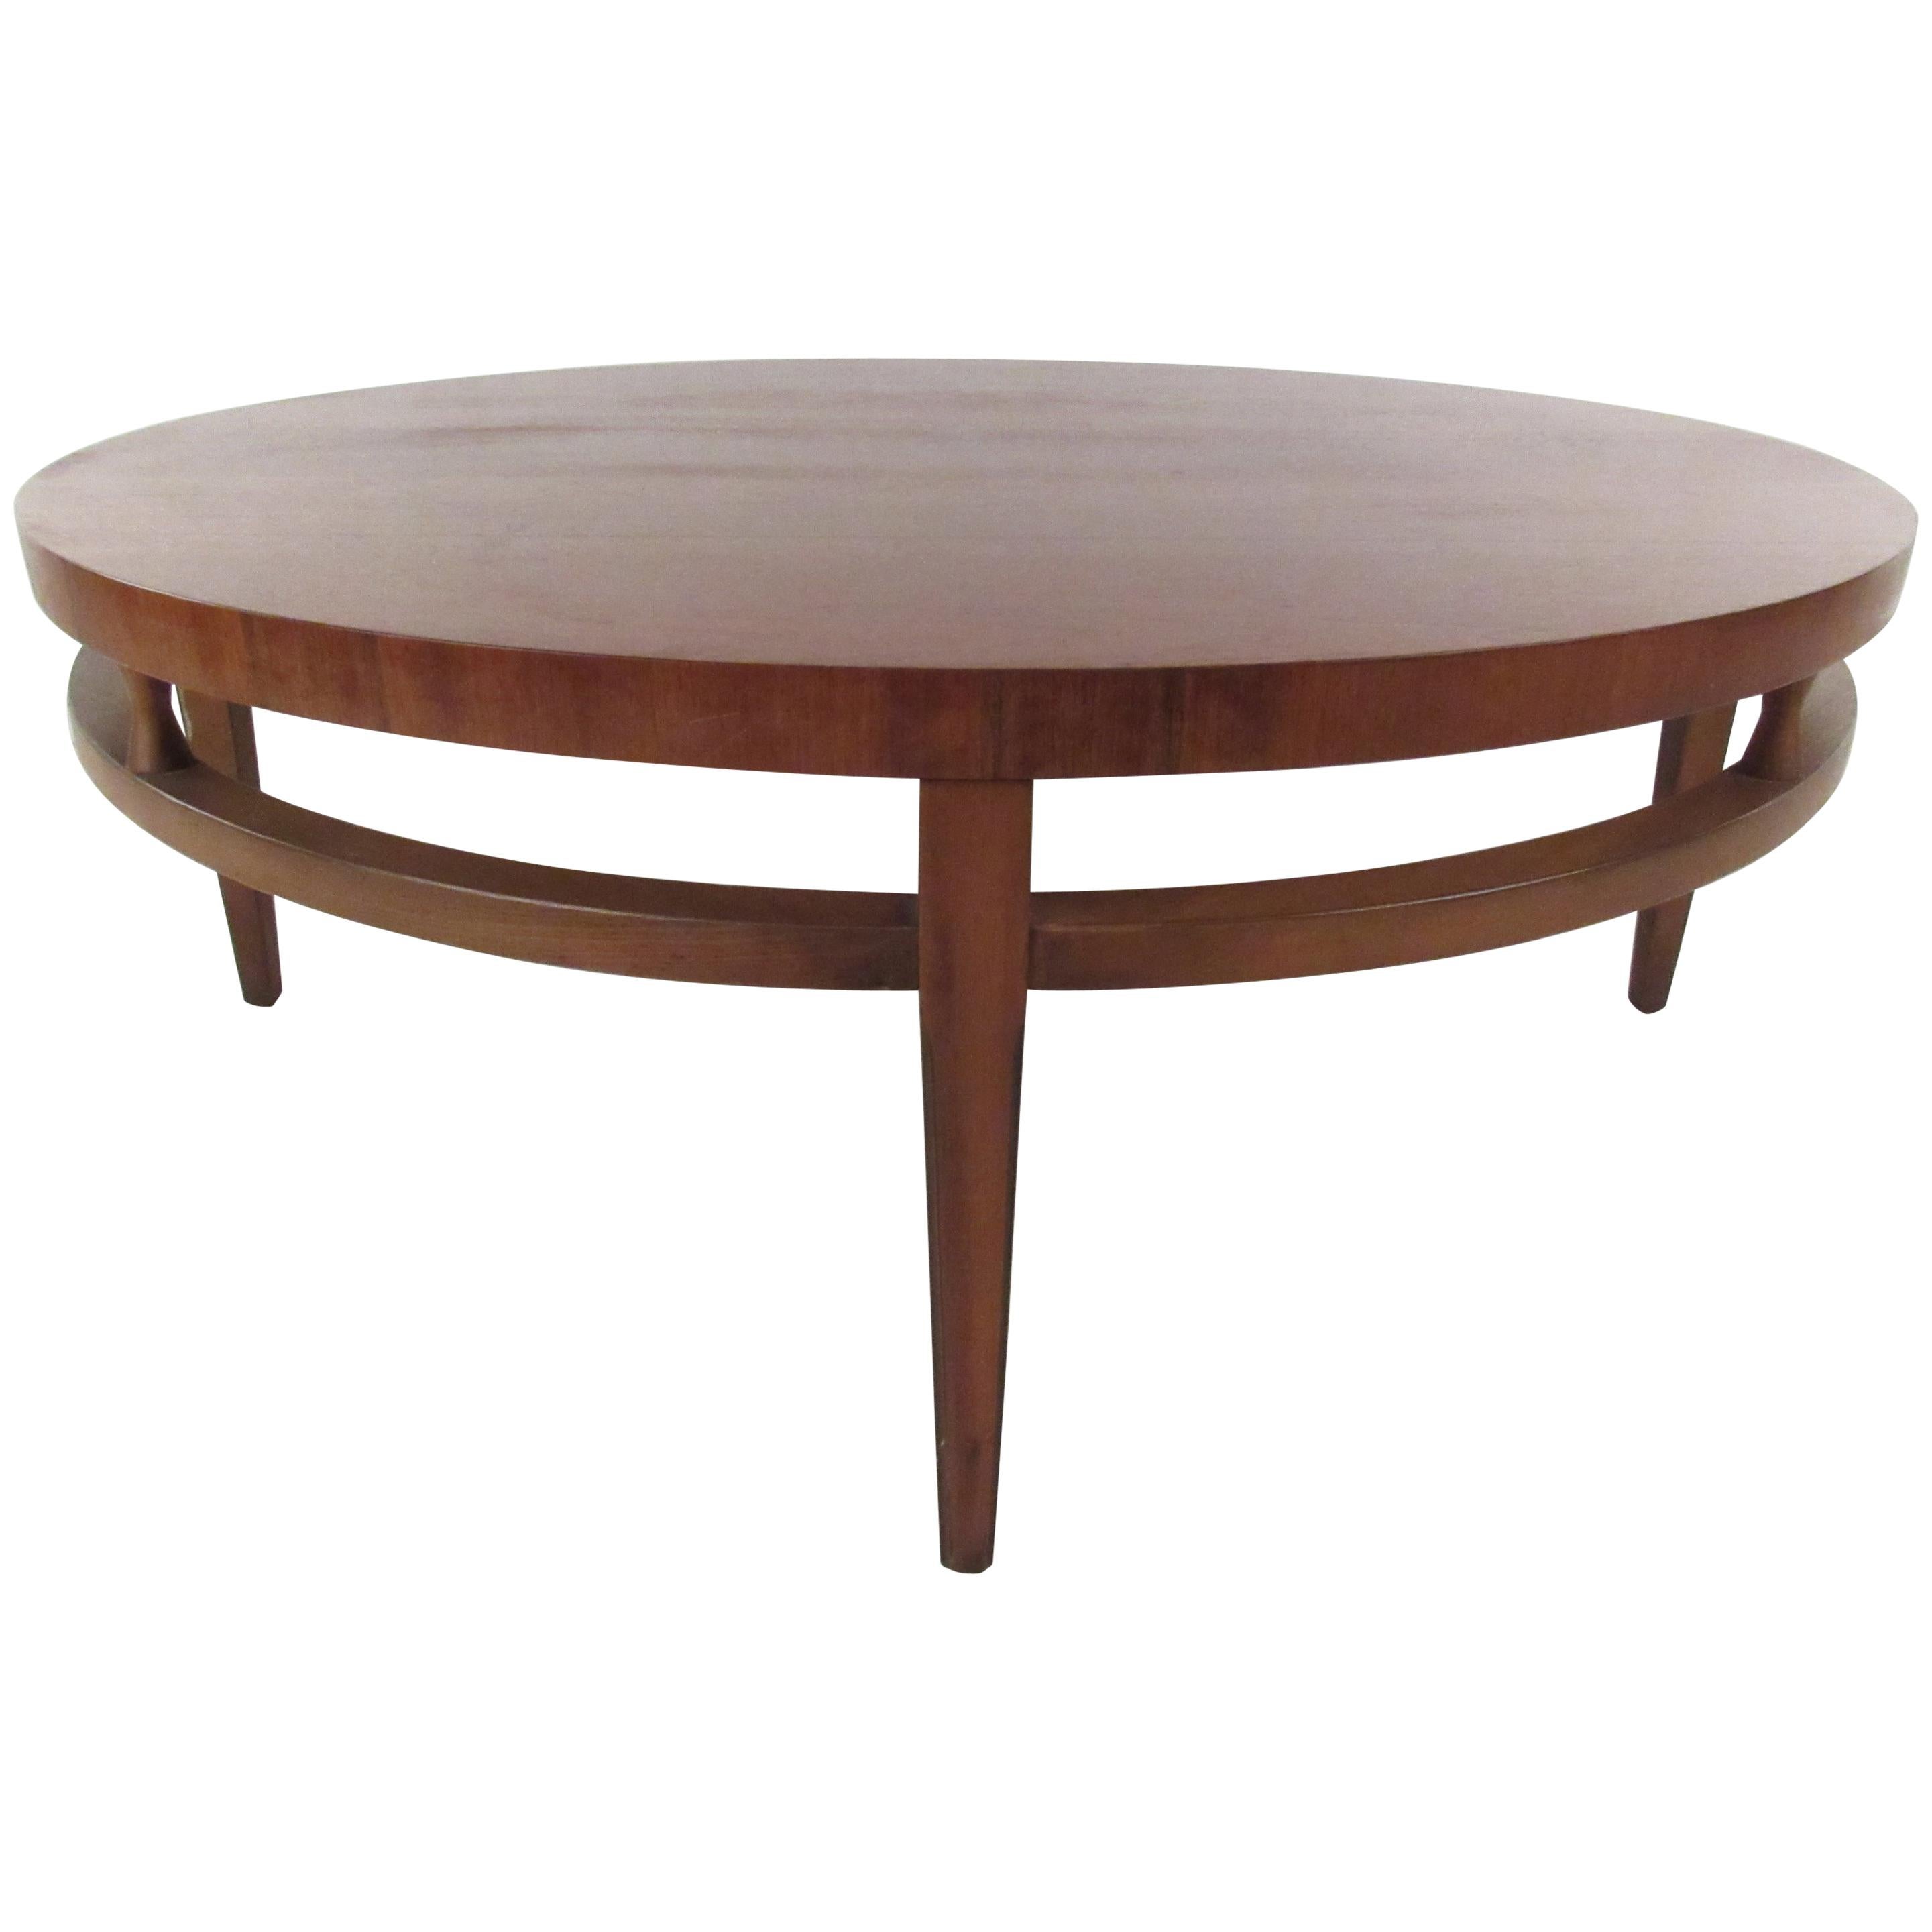 Round Mid-Century Modern Coffee Table by Lane Furniture